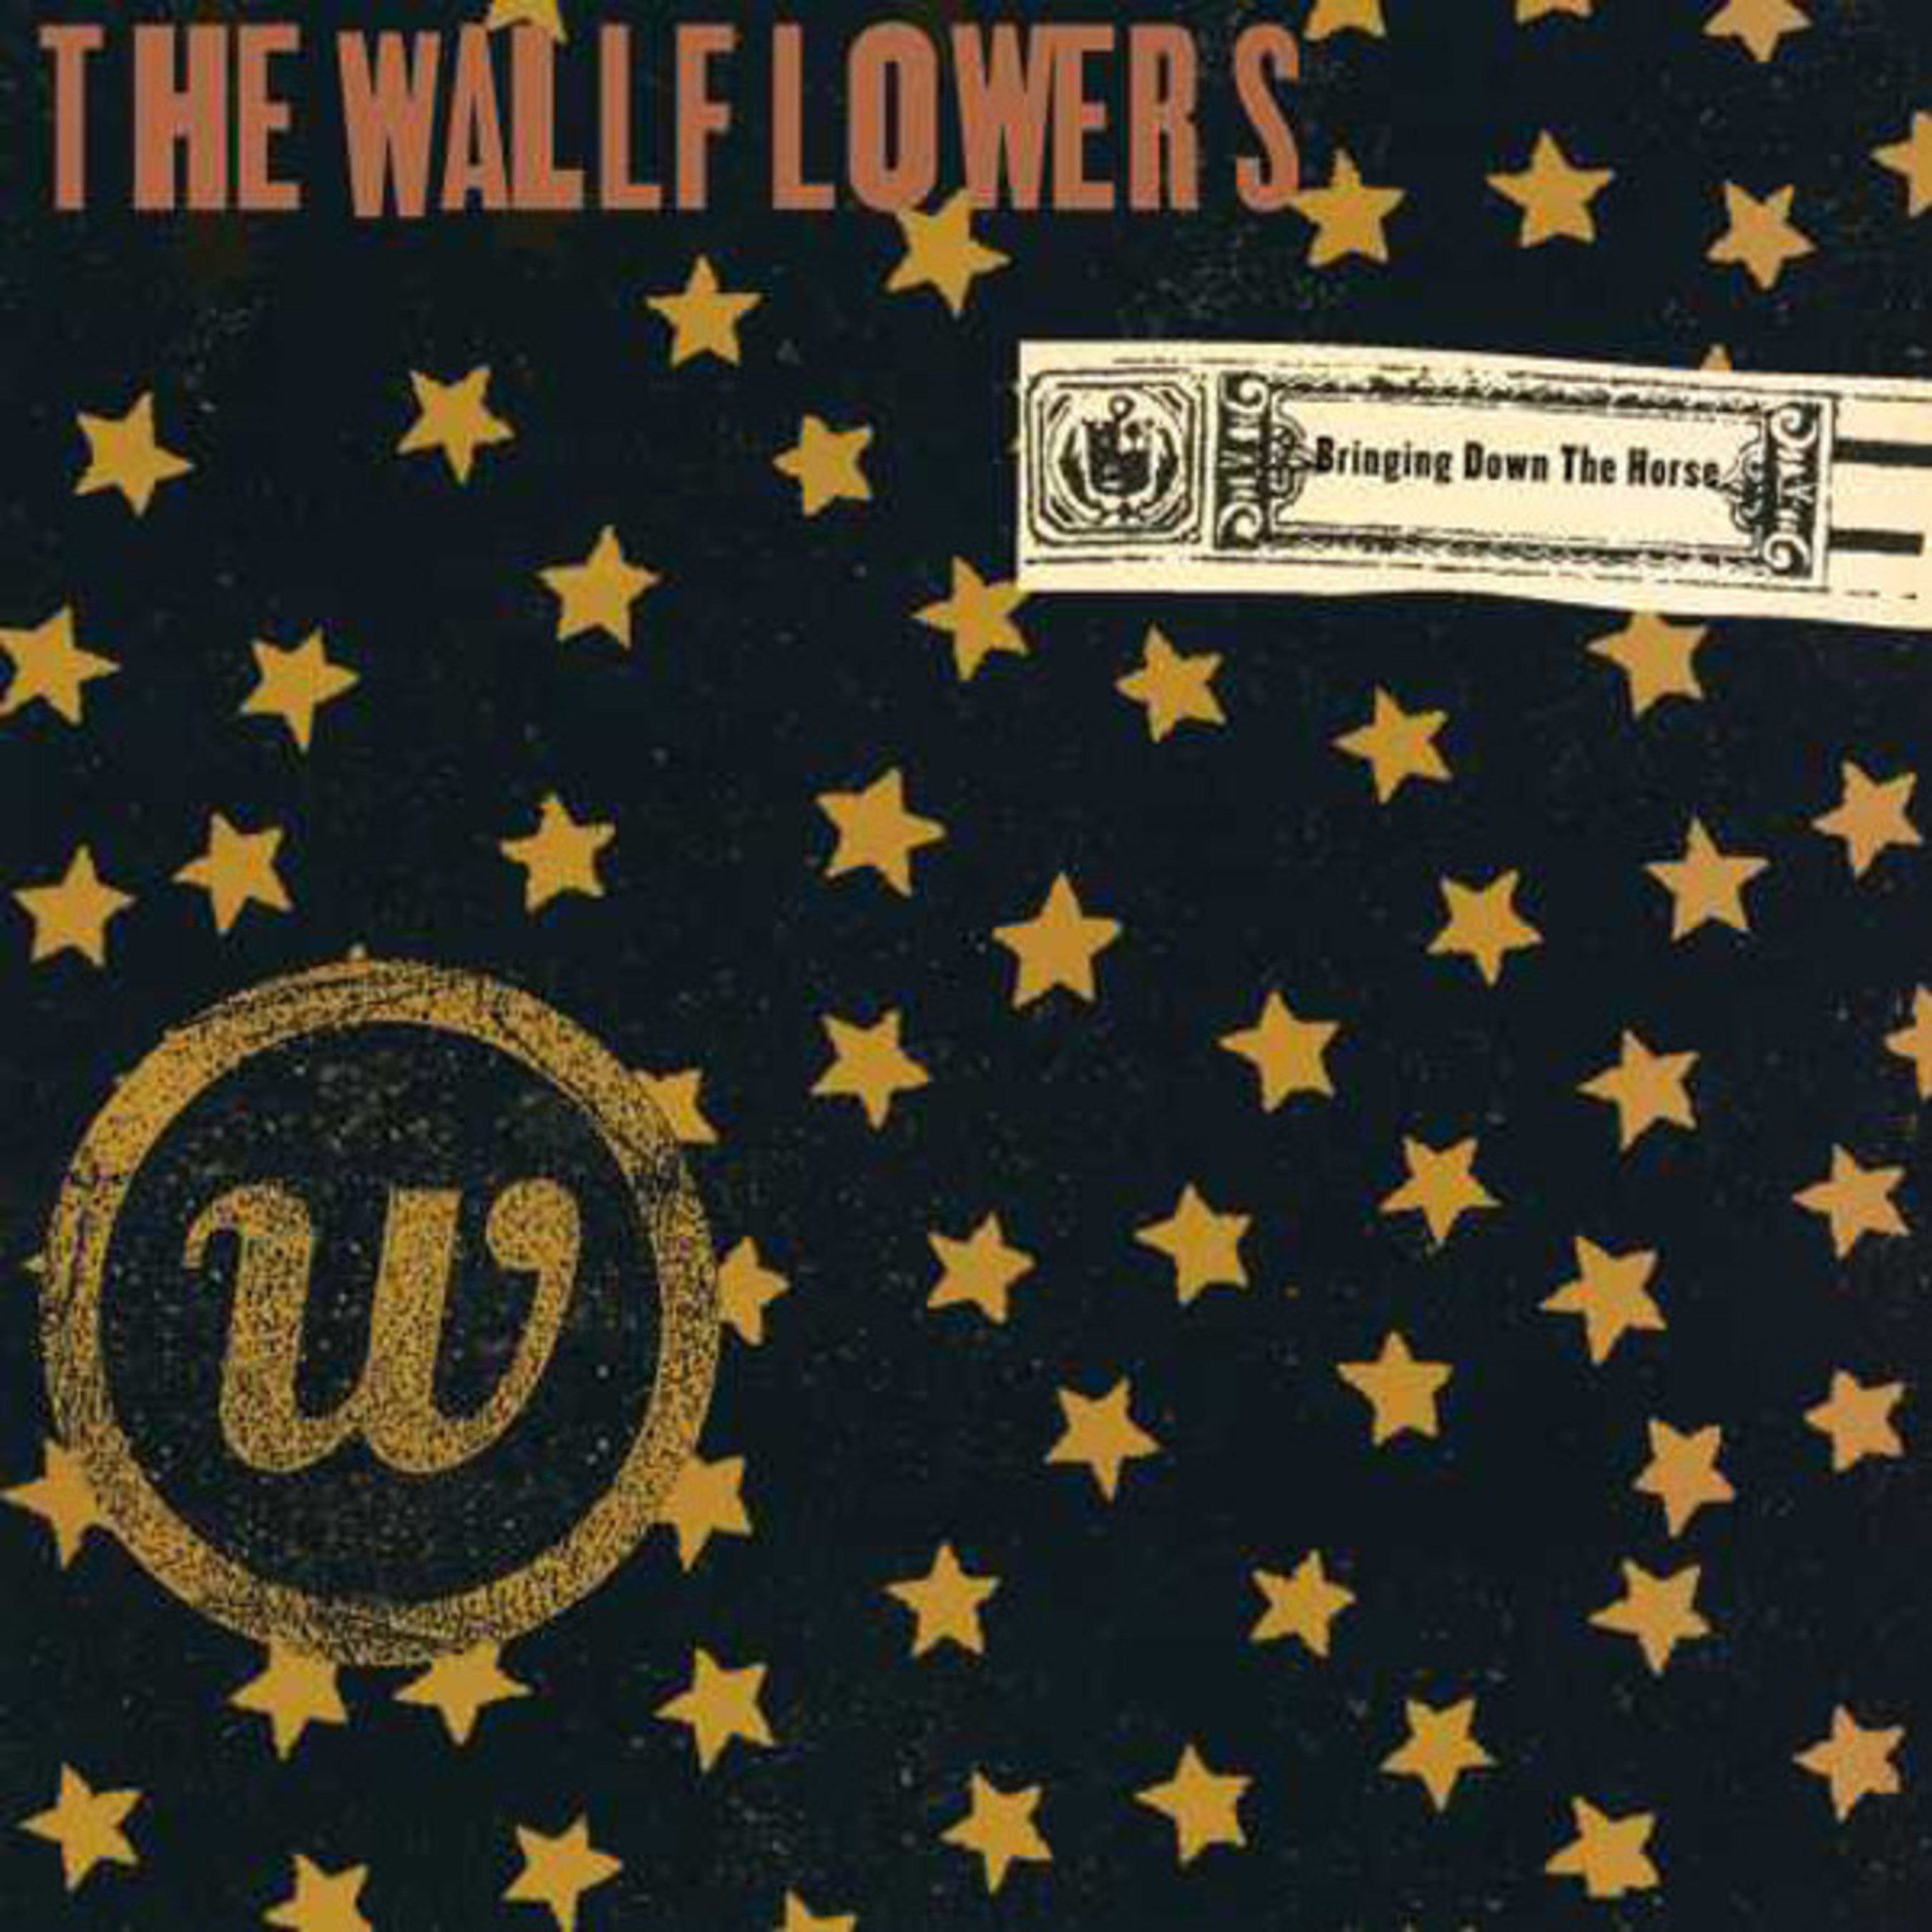 UME CELEBRATES 20TH ANNIVERSARY OF THE WALLFLOWERS' GRAMMY-WINNING BRINGING DOWN THE HORSE WITH FIRST-EVER TWO-LP VINYL REISSUE, MAY 13Classic Interscope release includes multi-format hits "6th Avenue Heartache," "One Headlight," "Three Marlenas," "The Difference"